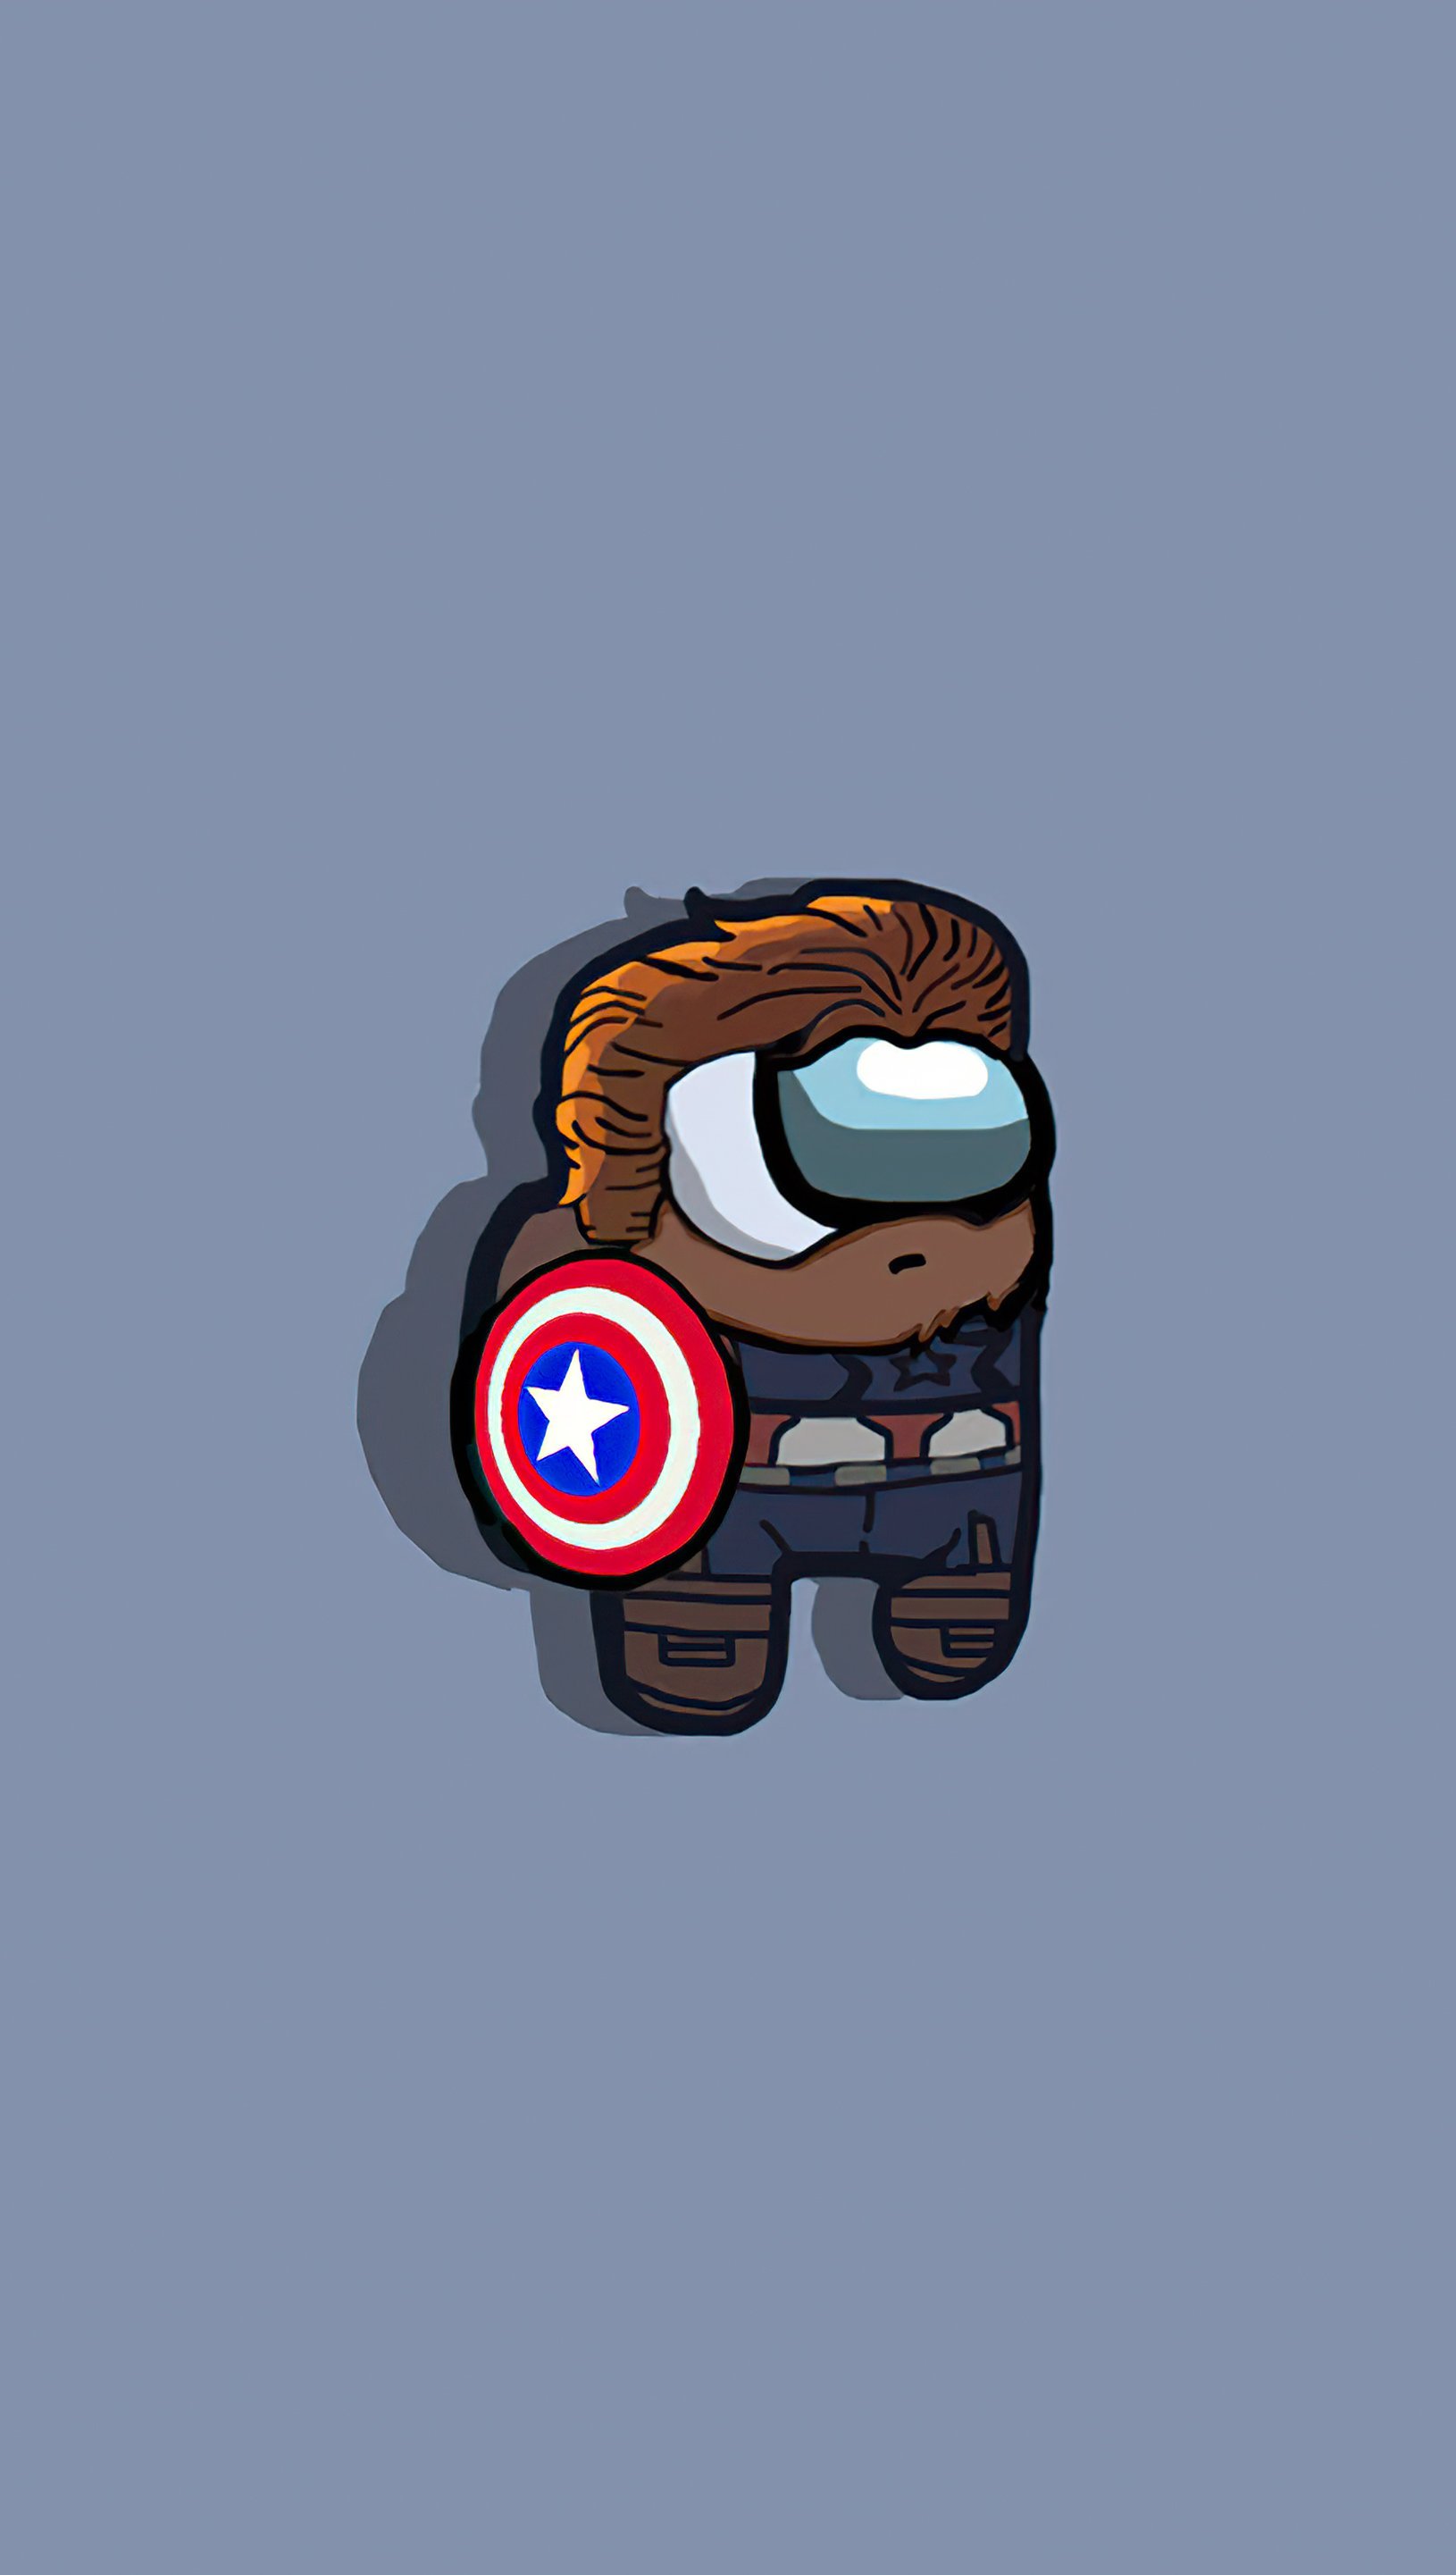 Captain America as character from Among us Wallpaper 5k Ultra HD ID:8341